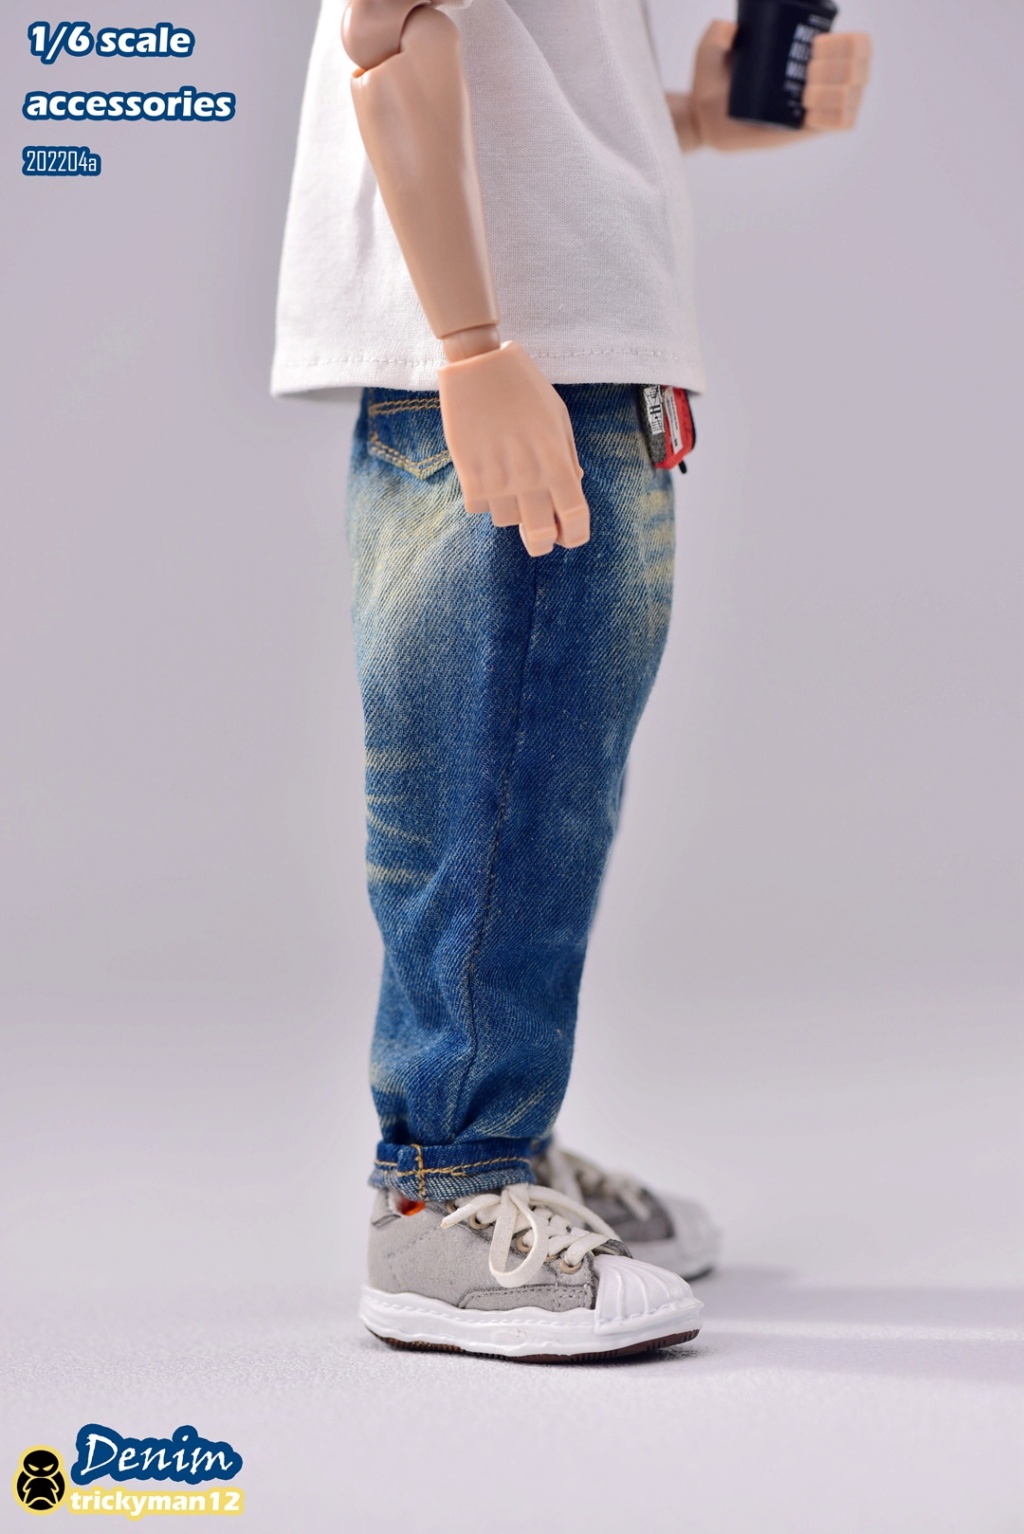 accessory - NEW PRODUCT: Trickyman12: 1/6 Denim Clothing Set [A/B Style] 17523512